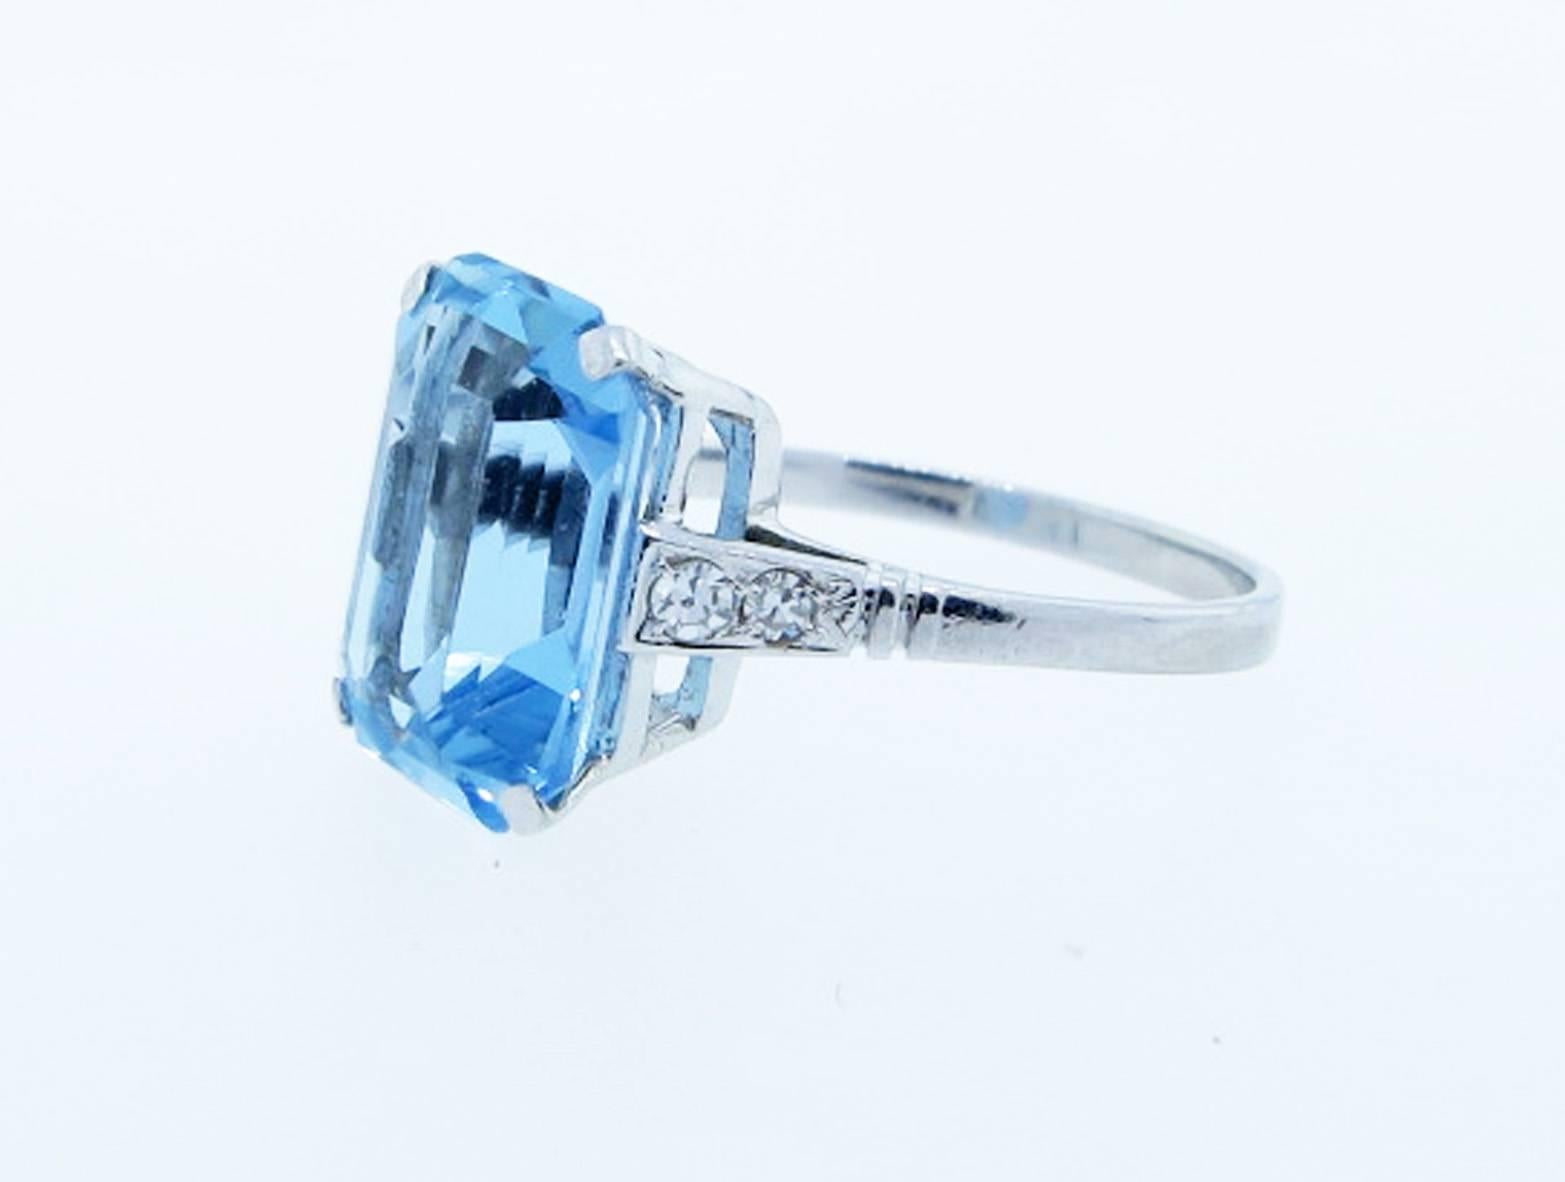 Simple platinum mount aquamarine ring prong set with a faceted emerald cut center natural sky blue aquamarine measuring 12.6 mm. x 9.3mm. weighing approx 3.75cts. Each shoulder is bead set with two round diamonds totaling approx .10 cts.Size 6 and